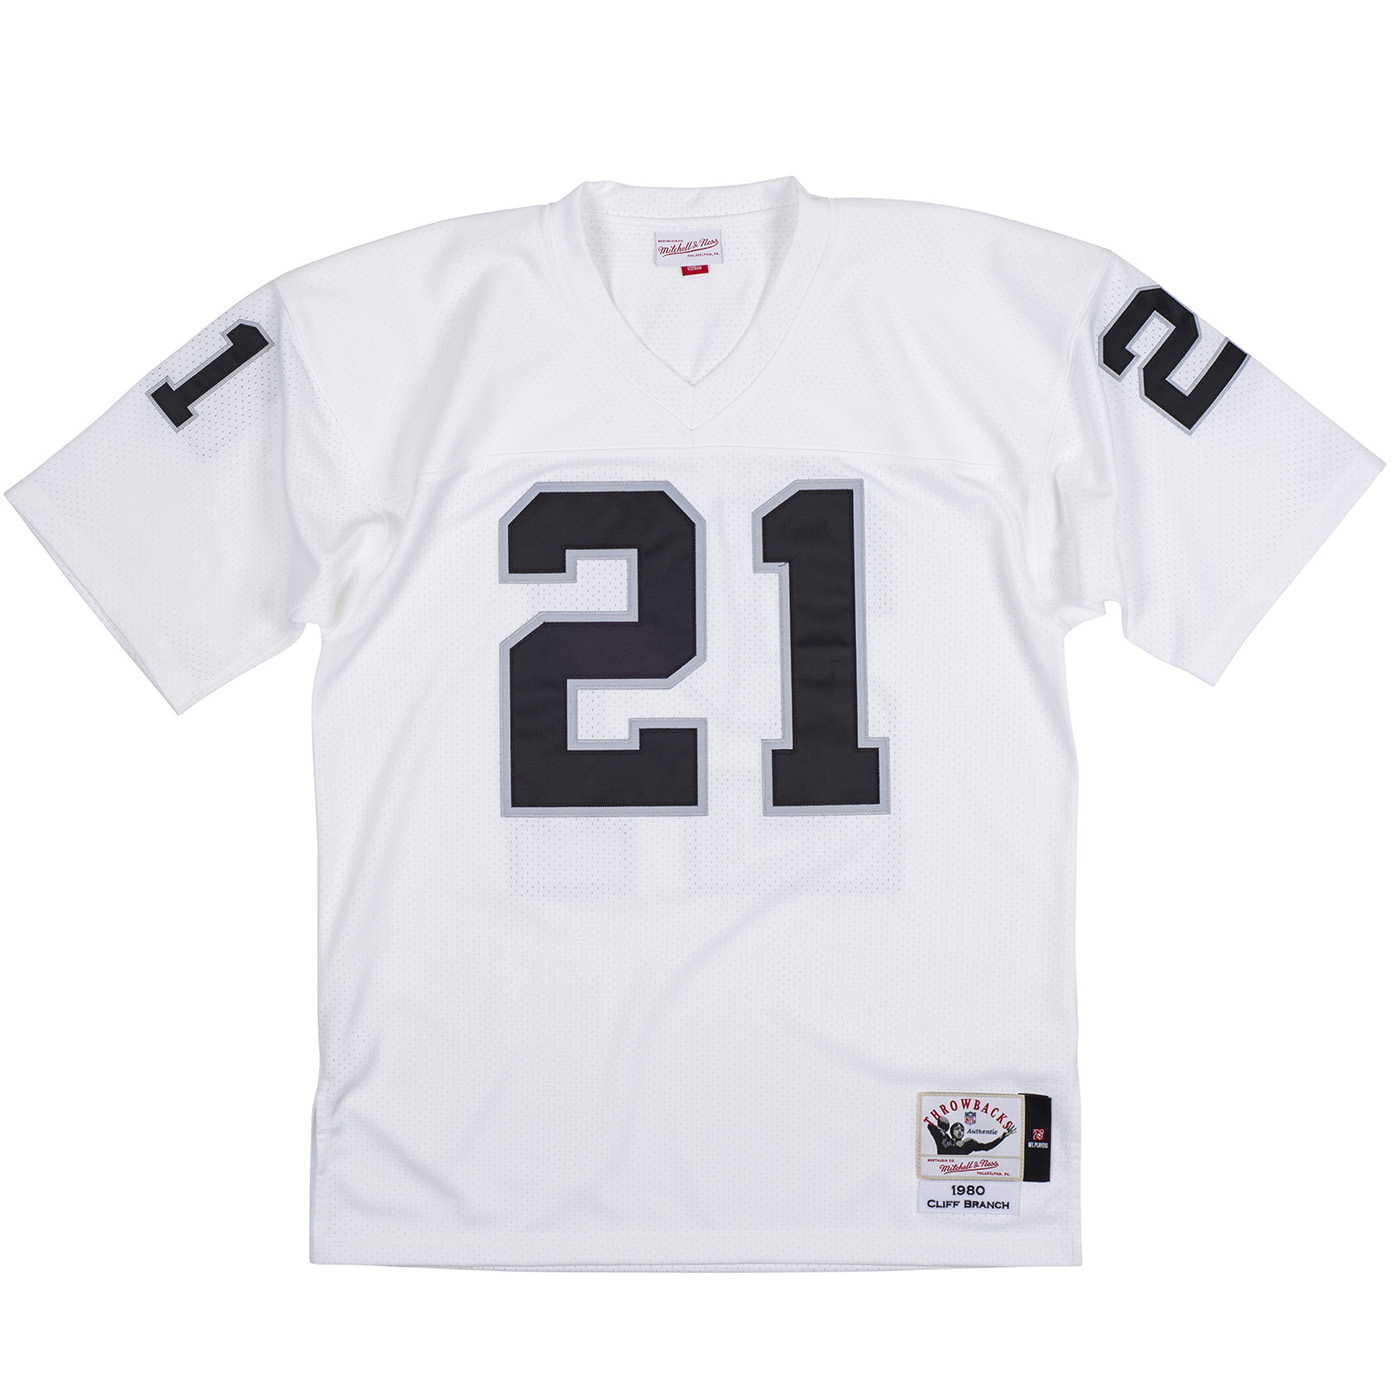 cliff branch jersey